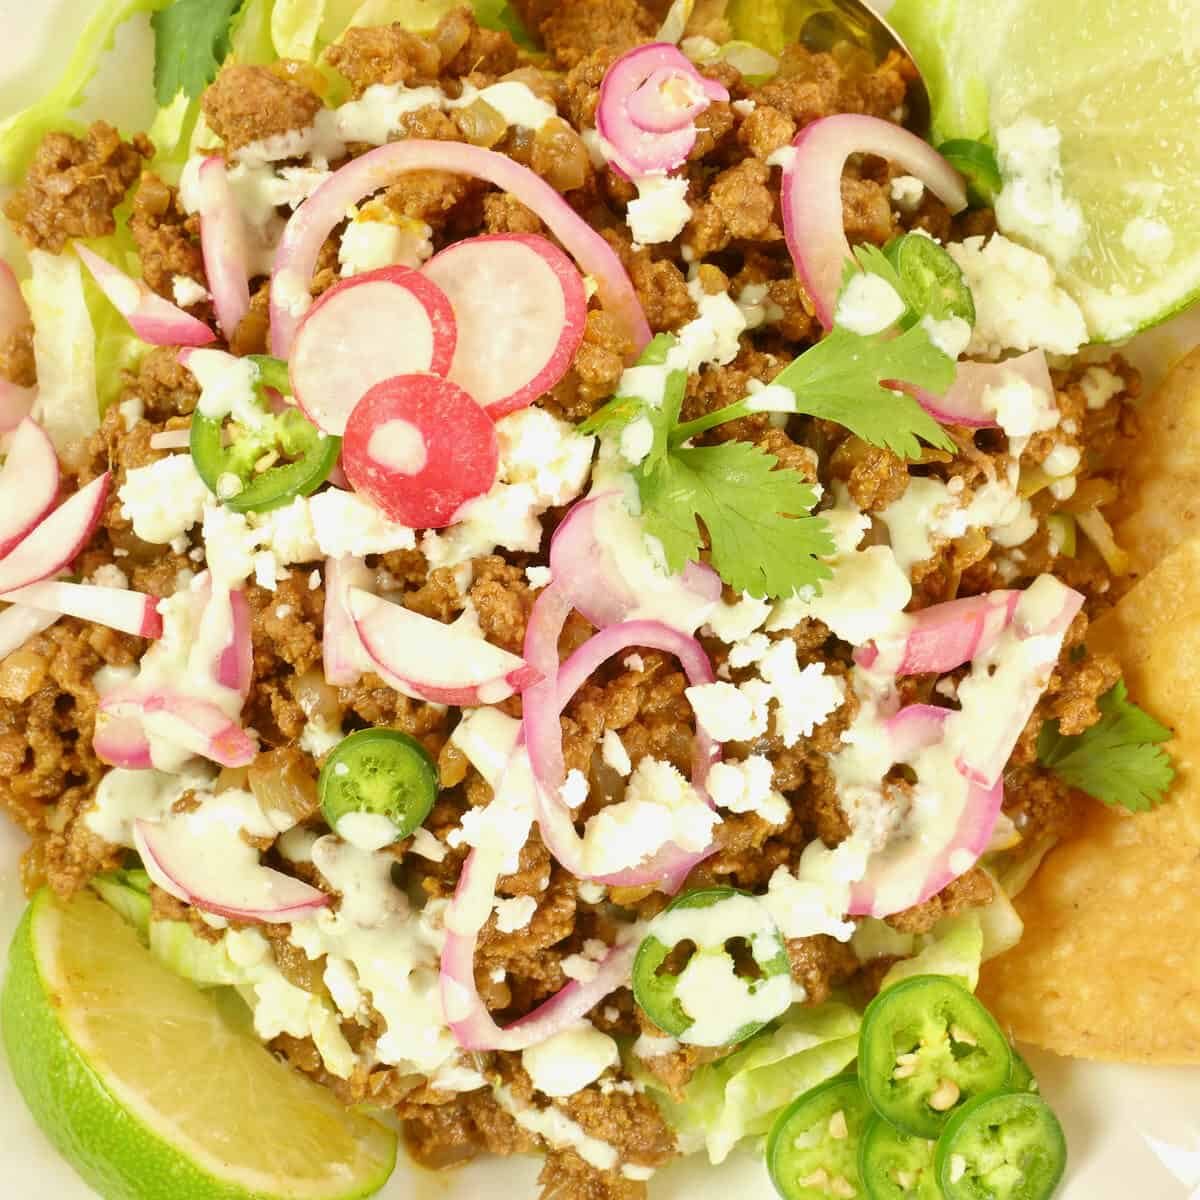 Taco Filling Ideas - Indianish Two tacos garnished pickled red onions, sliced radishes, cheese crumbles and a flutter of cilantro leaves.